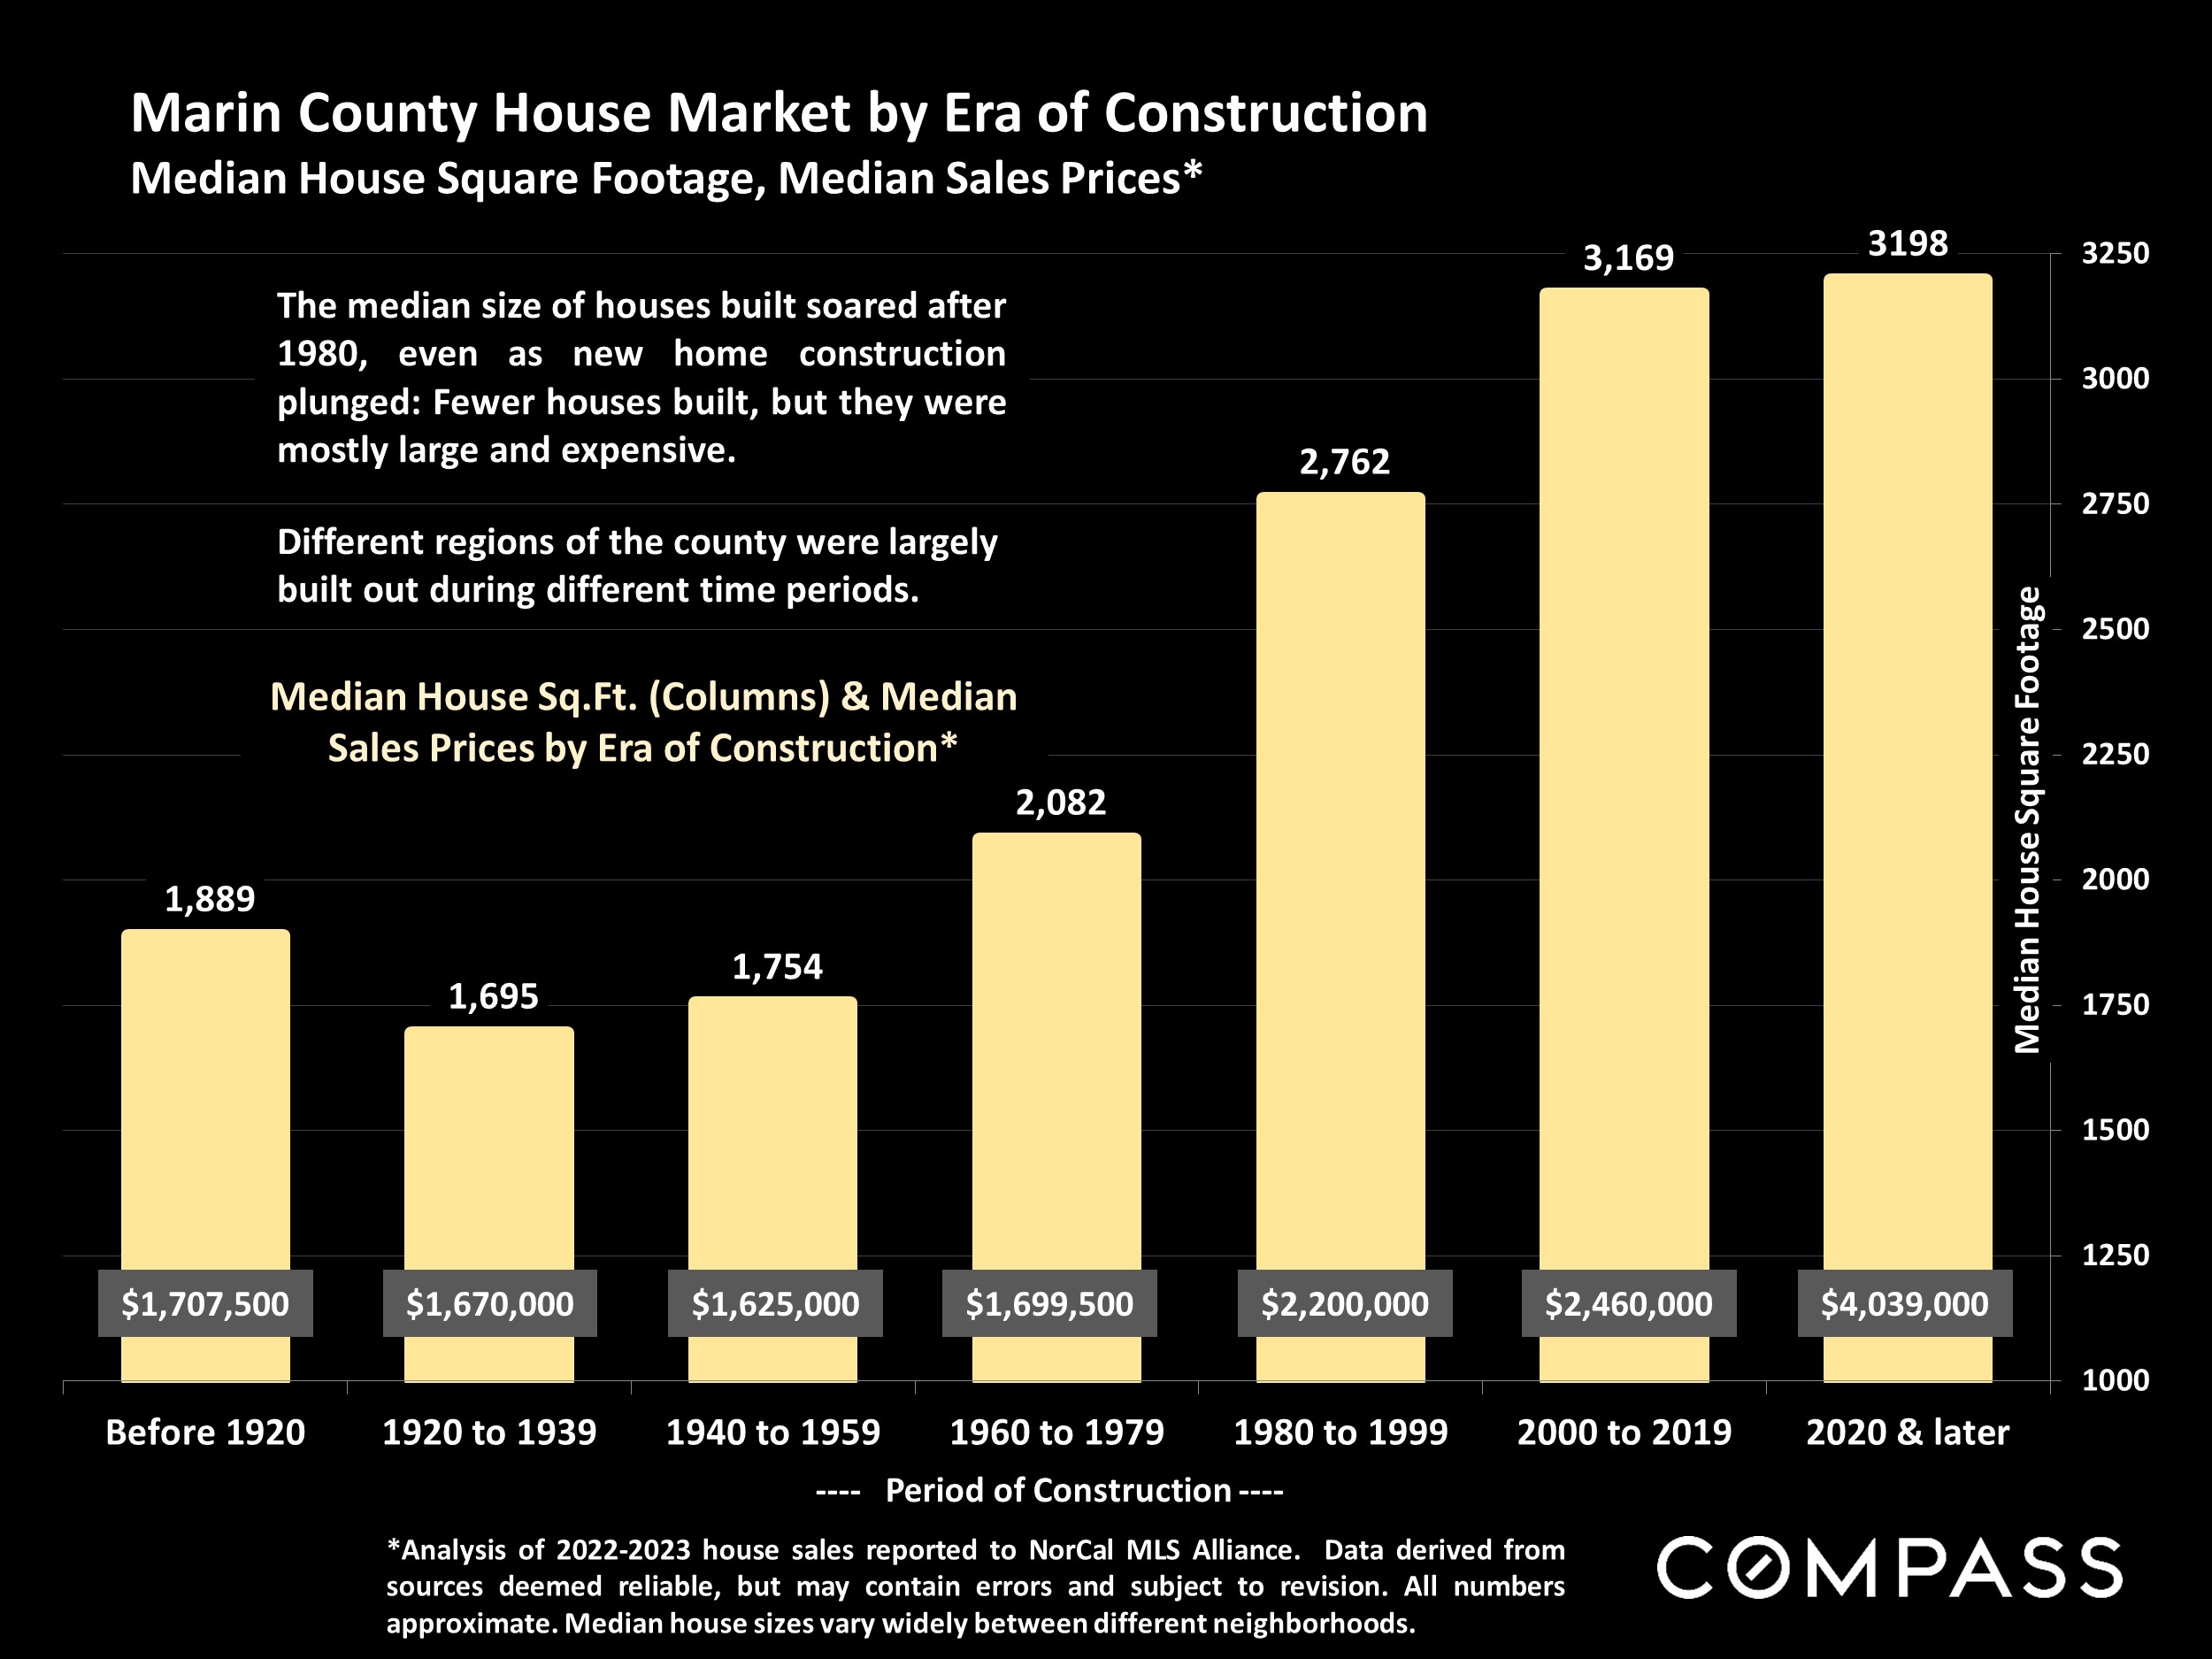 Marin County House Market by Era of Construction Median House Square Footage, Median Sales Prices*